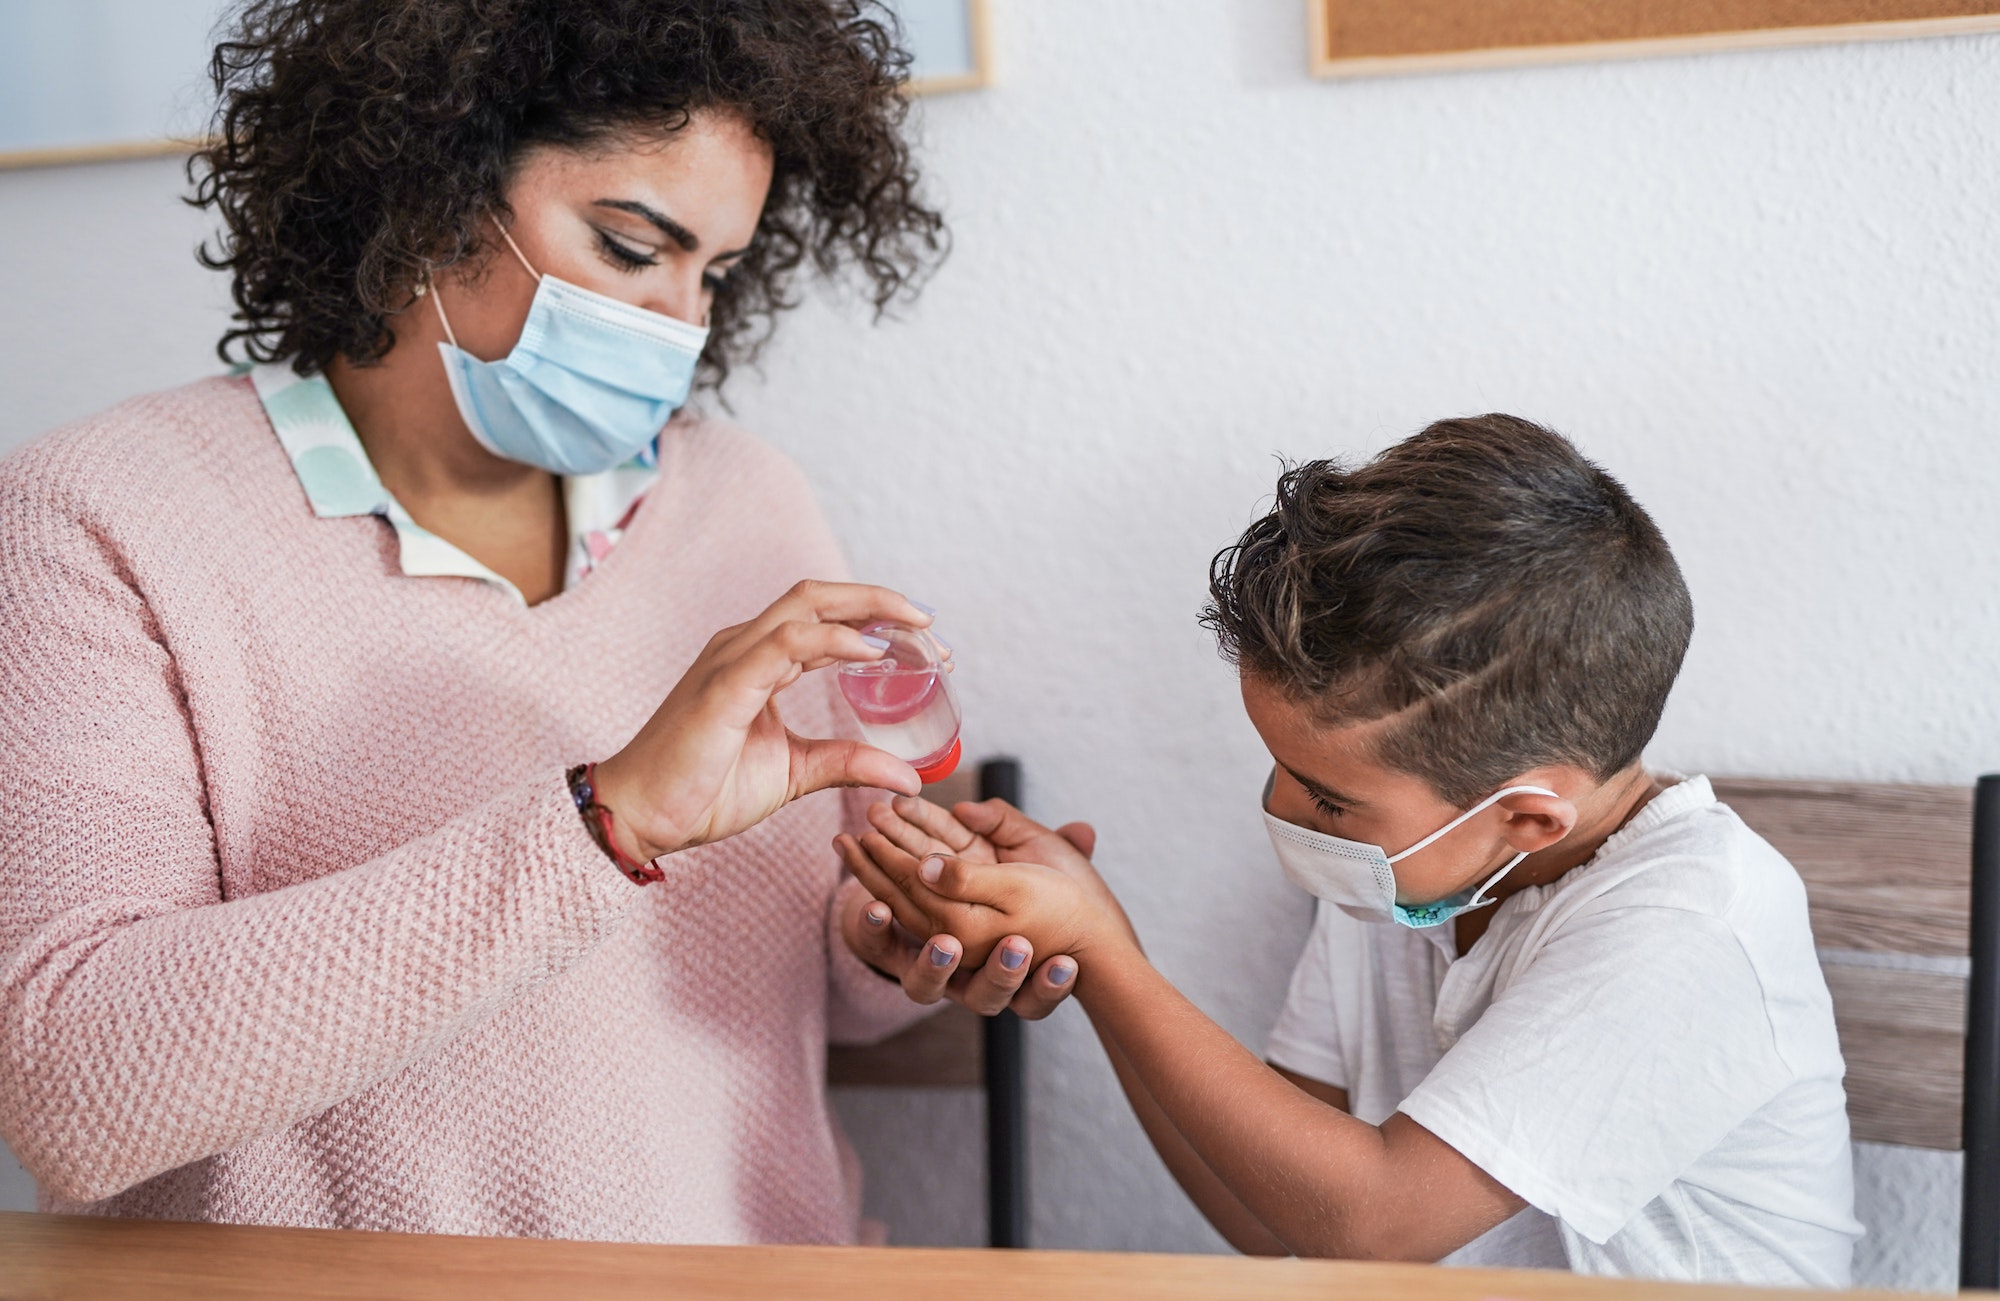 Teacher disinfect hand of child while wearing surgical face mask for coronavirus outbreak